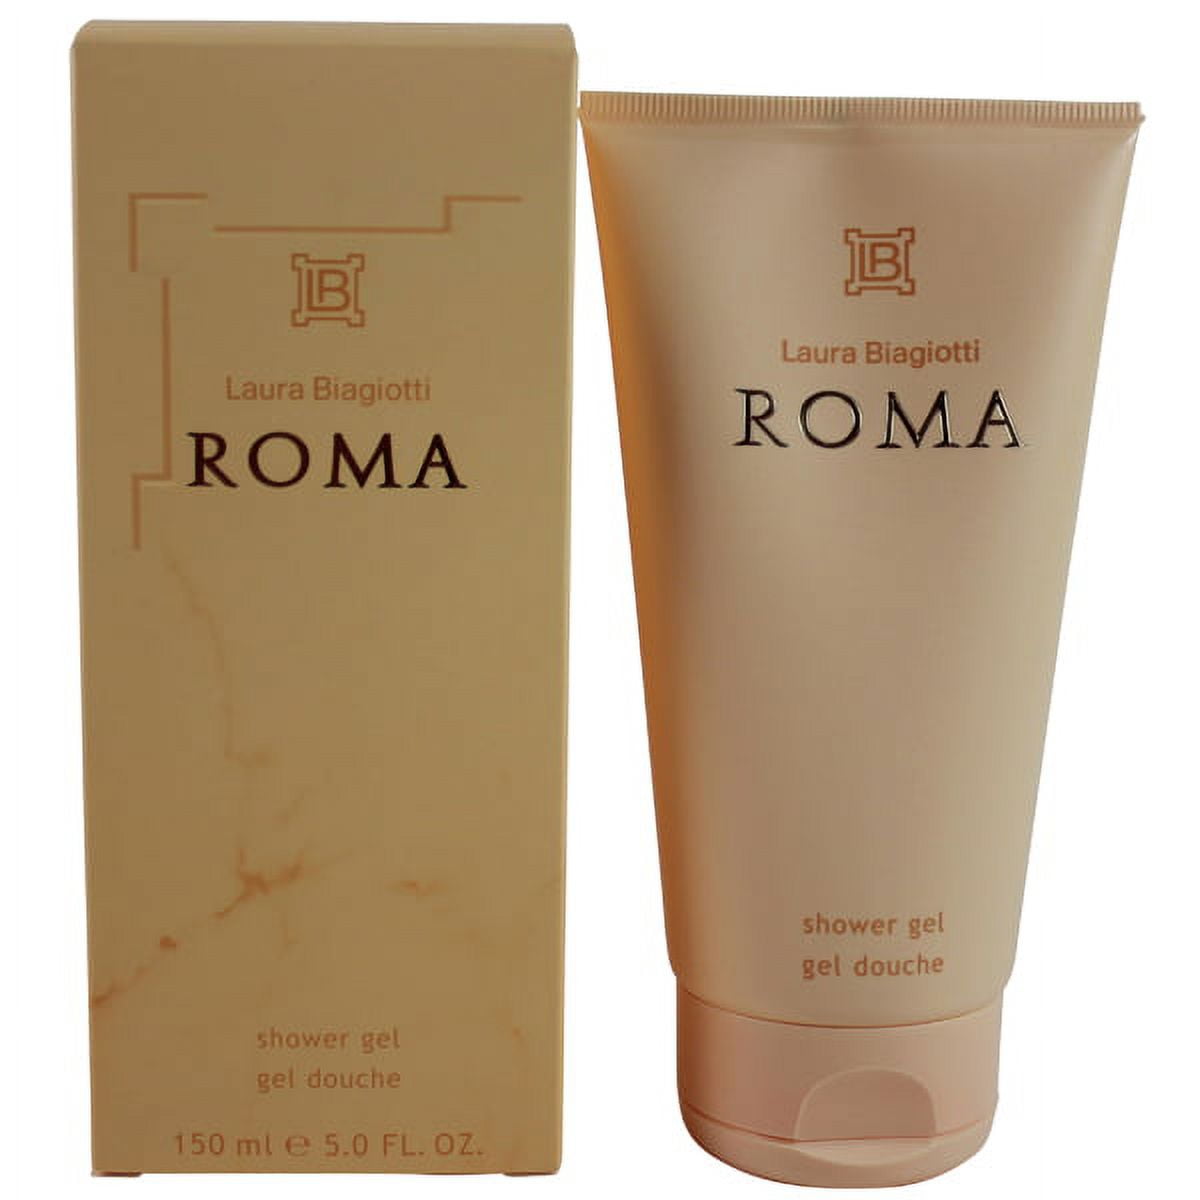 Roma by Laura Biagiotti for Women Shower Gel 5 oz. New in Box